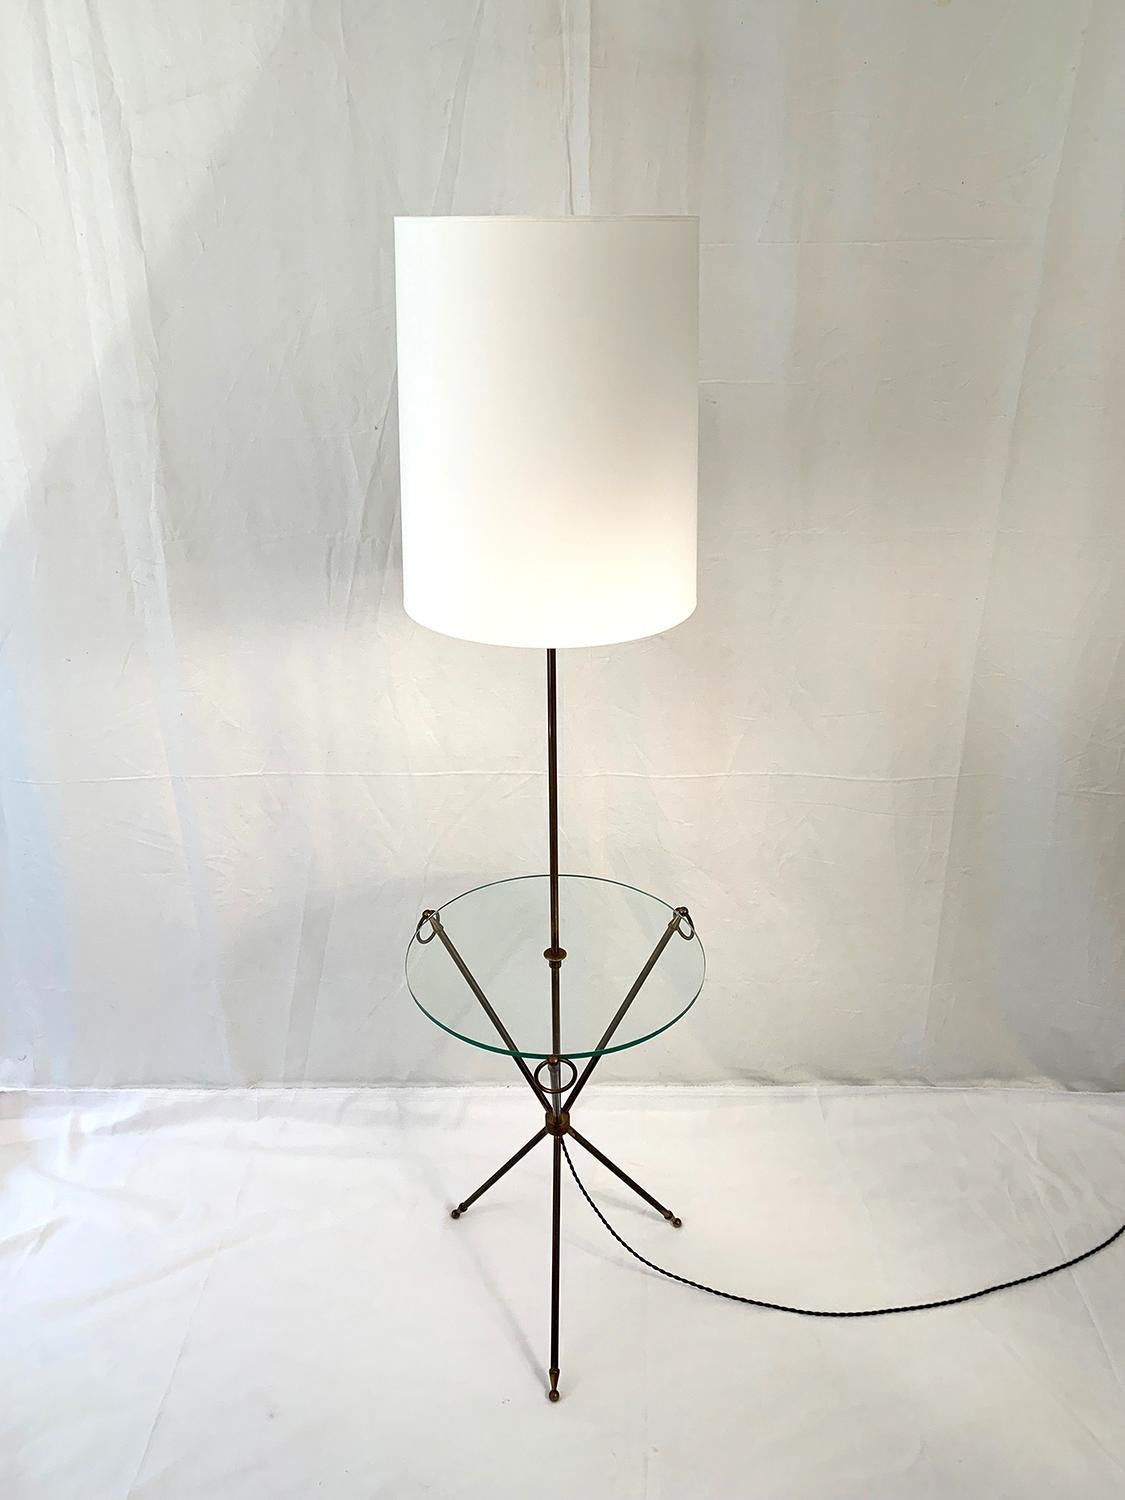 Superb brass tripod floor lamp, 1960s. The floor lamp is made of a brass tripod with loop handles, and a transparent glass on its top. The white cotton shade is new.

Superbe lampadaire trépied en laiton, 1960s. Le lampadaire se compose d'un